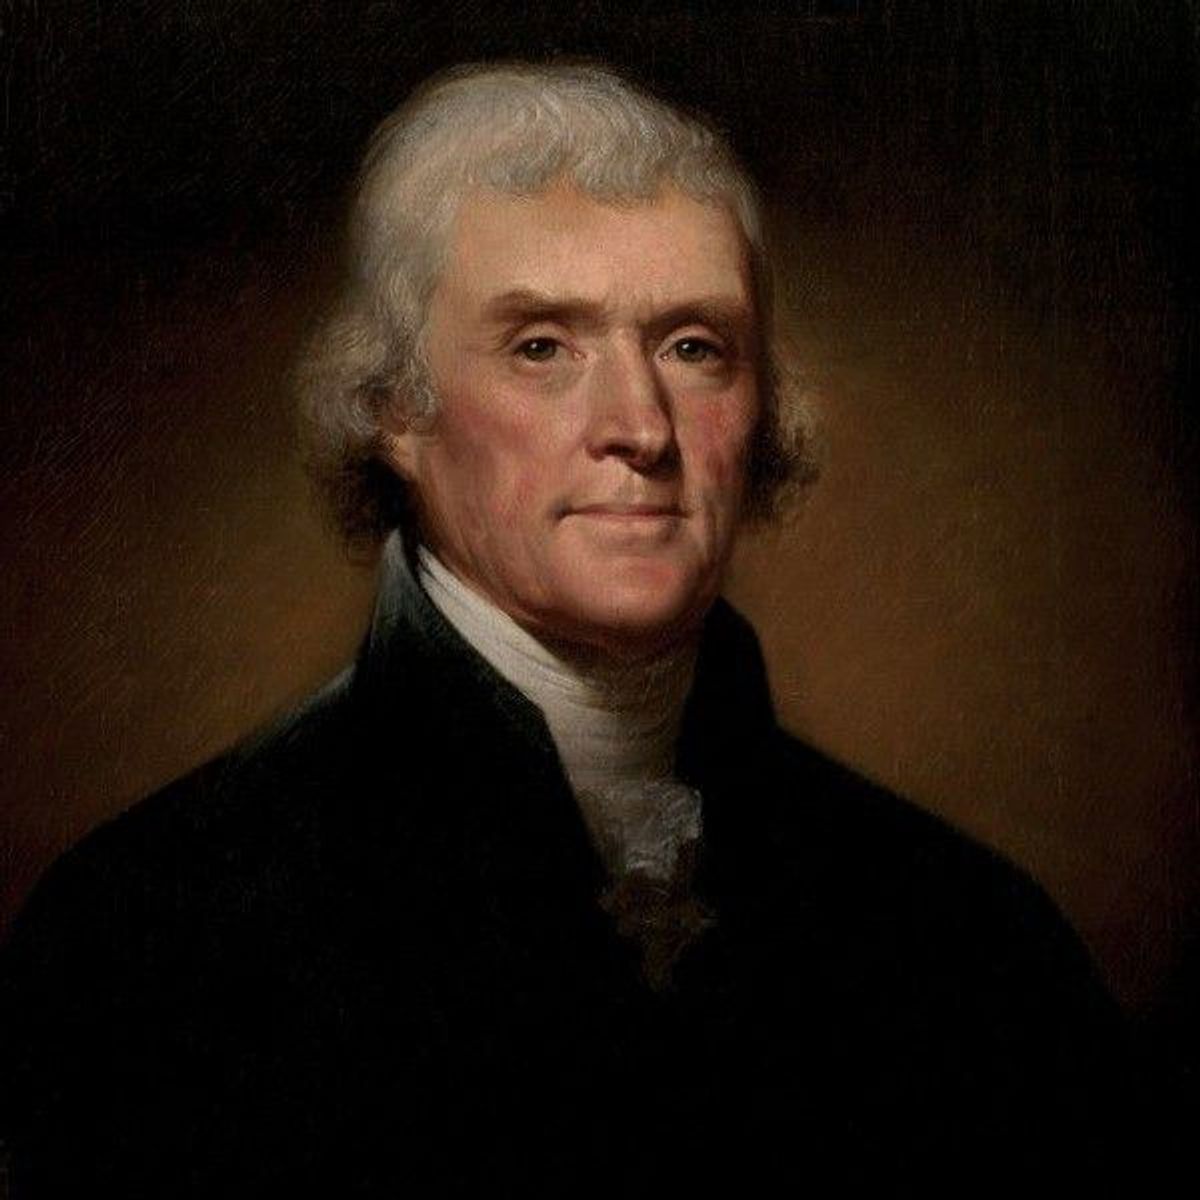 A Day In The Life Of Thomas Jefferson: The Story Behind His 'Little Mountain'